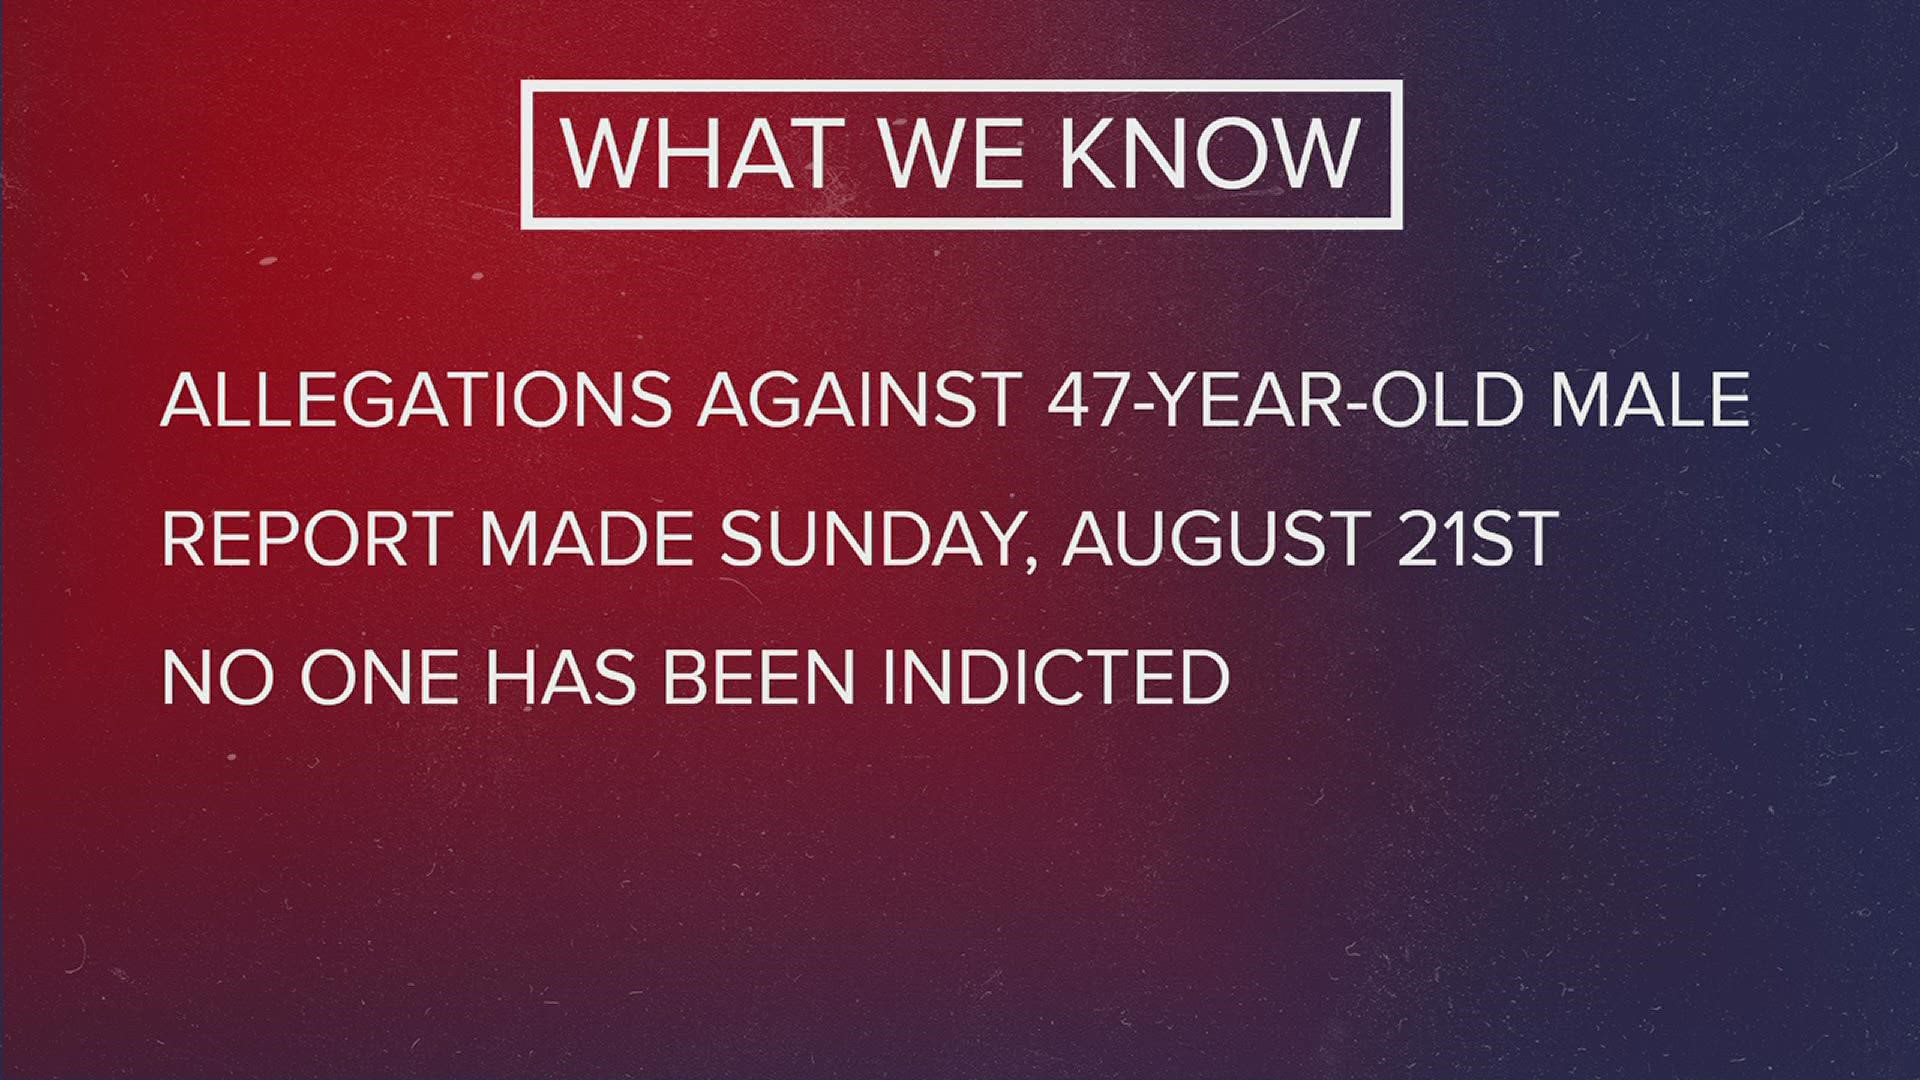 No one has been indicted in connection with the allegations which were reported to police last week.